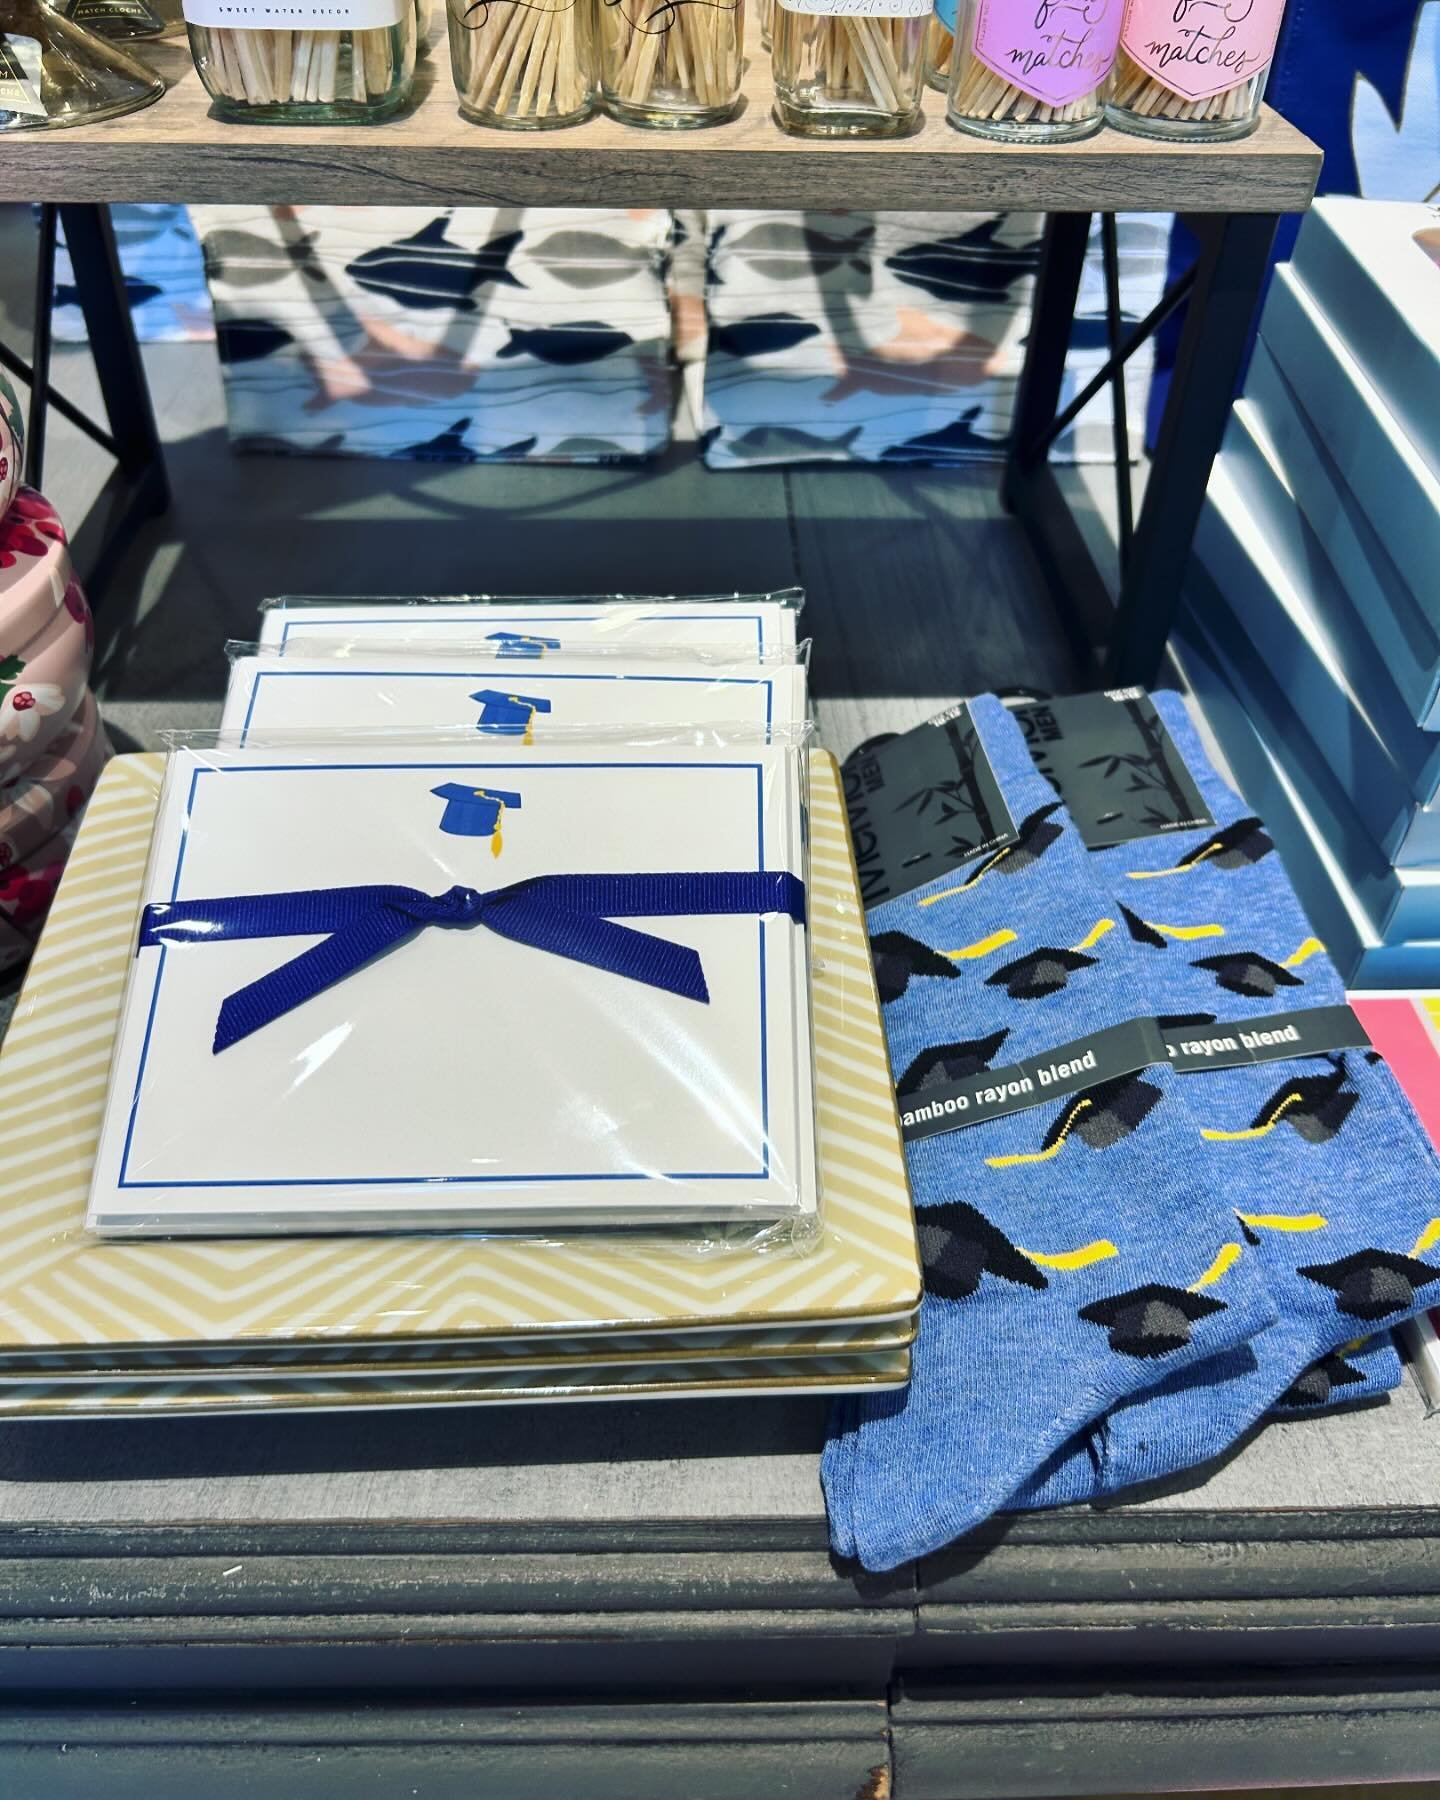 Graduation socks and notecards make great gifts! Stop by today. Open til 6 @thecrossingclarendon. 

#shoplocal #shopsmall #shoparl #boutiqueshopping #clarendonva #graduationseason🎓